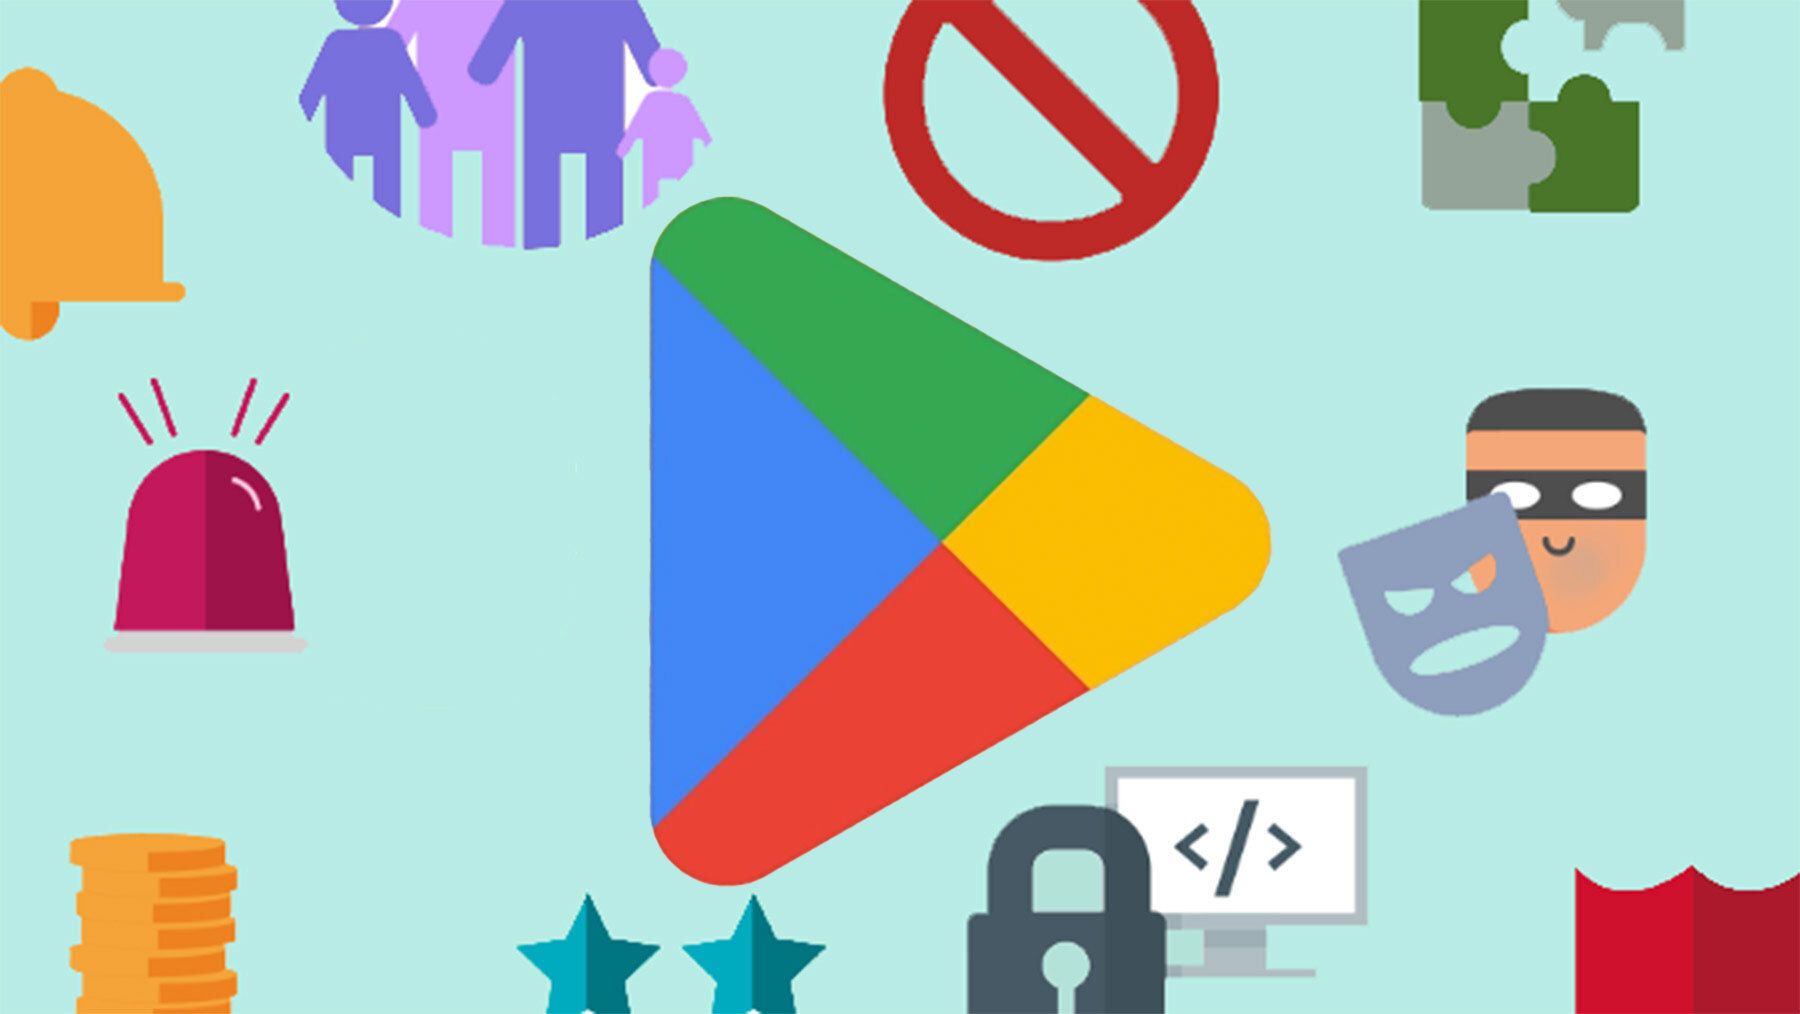 Google Play Policies: Important 2022 changes you need to know